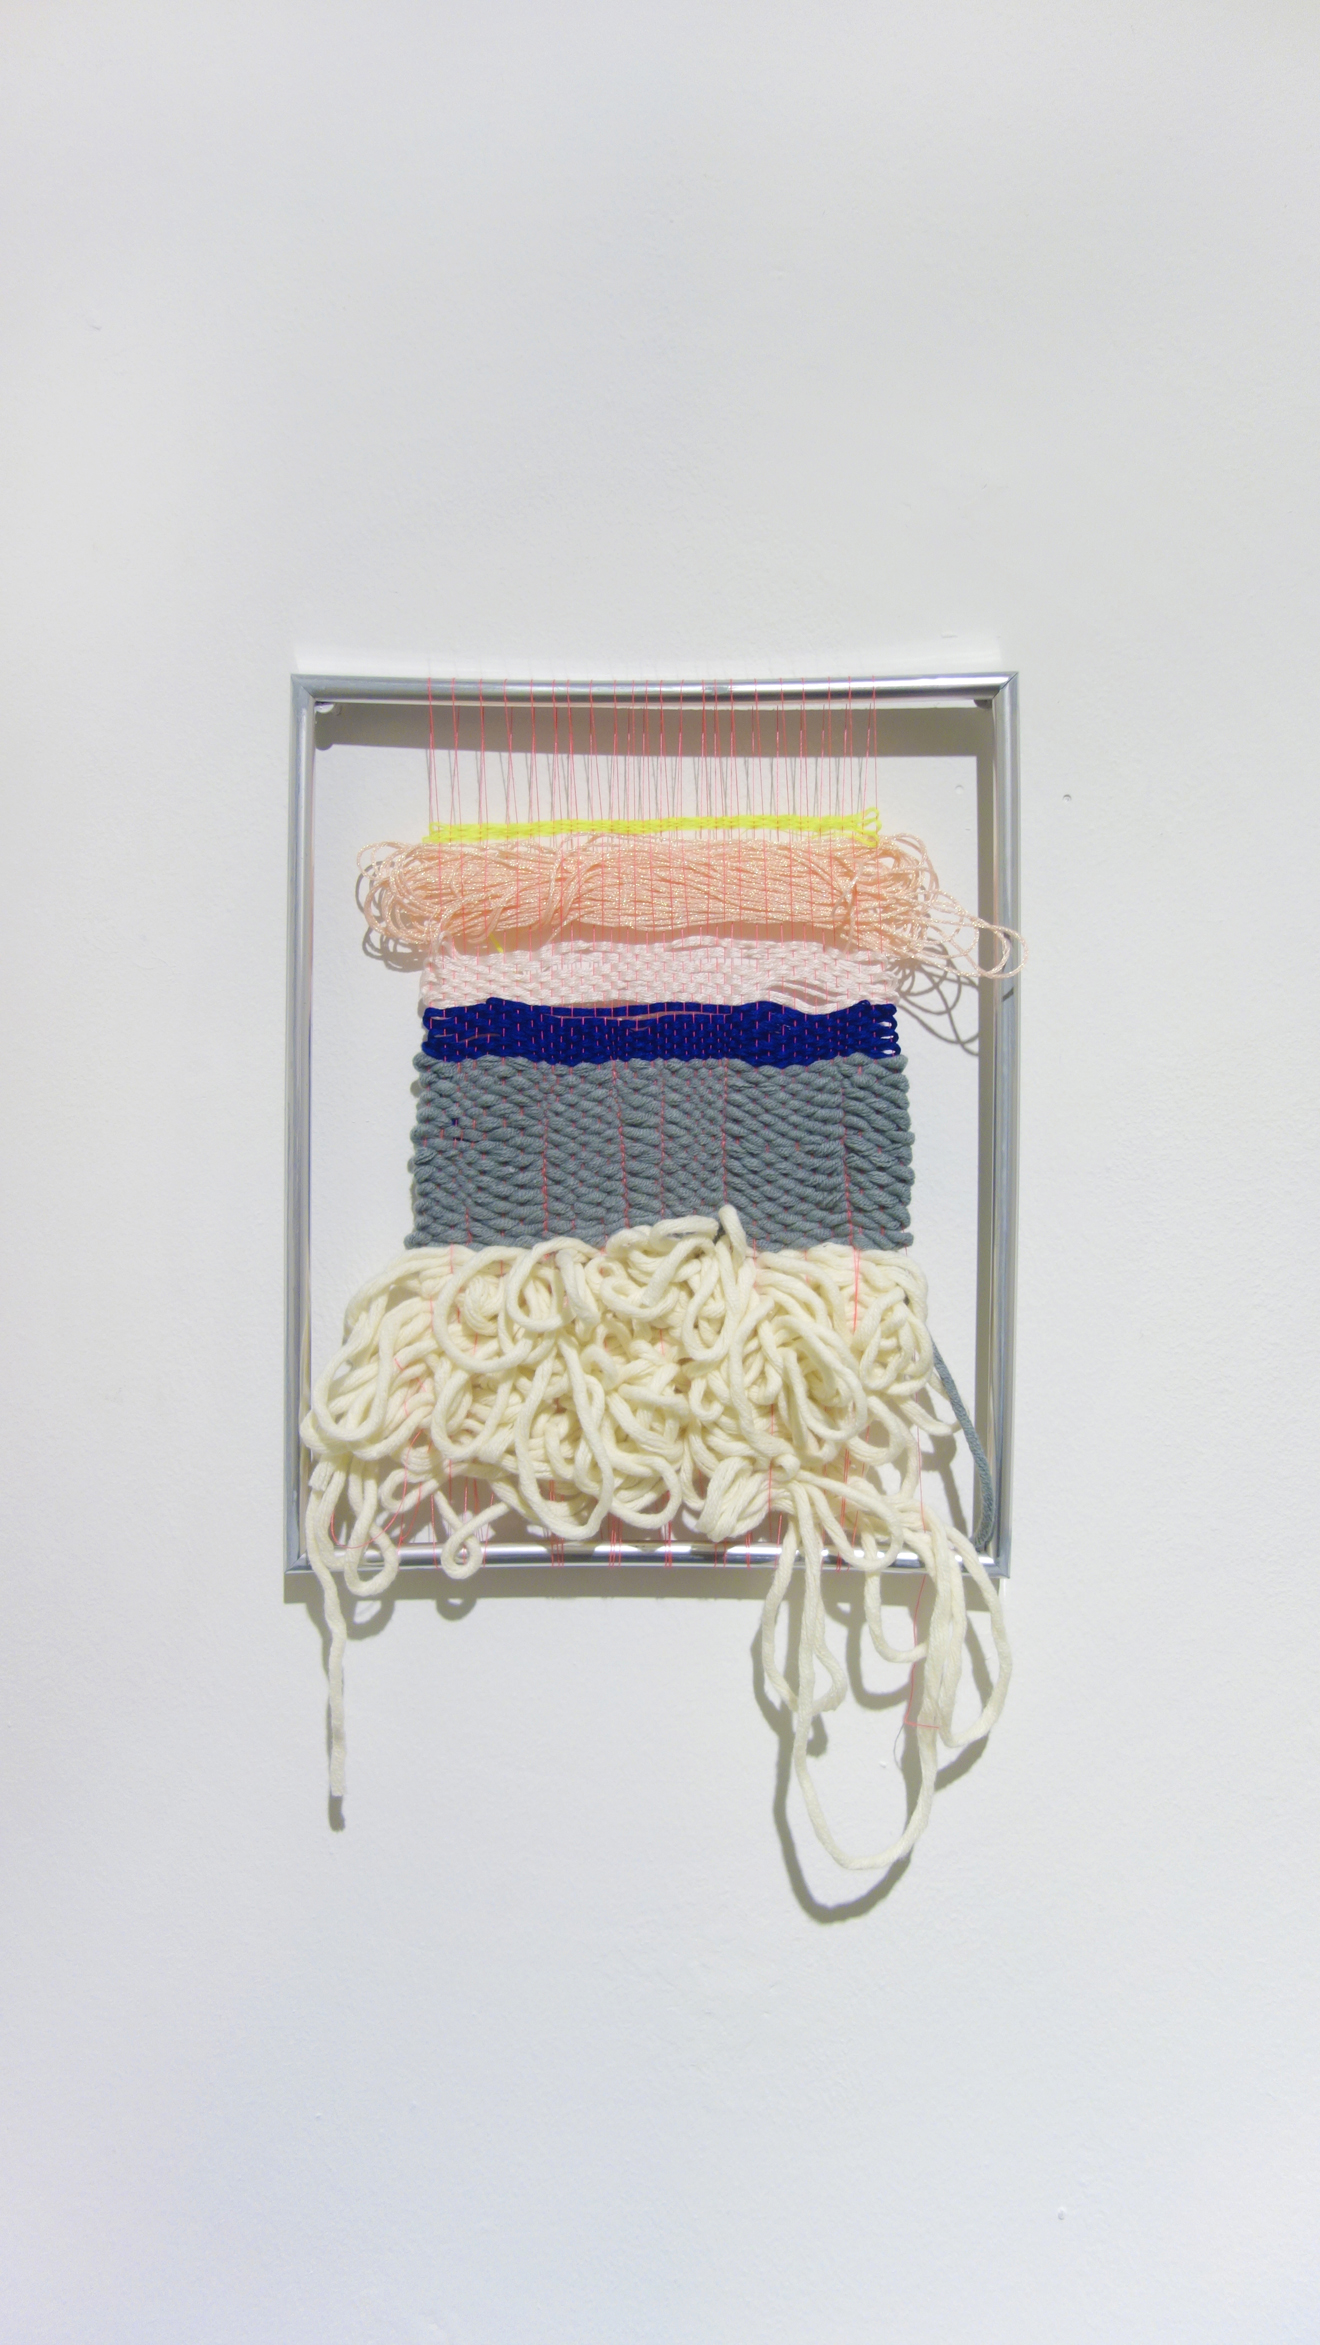 Izziyana Suhaimi, In Between Forgetting, 2015, Cotton and polyester thread woven on found frame, H34 x W21.5 cm.jpg